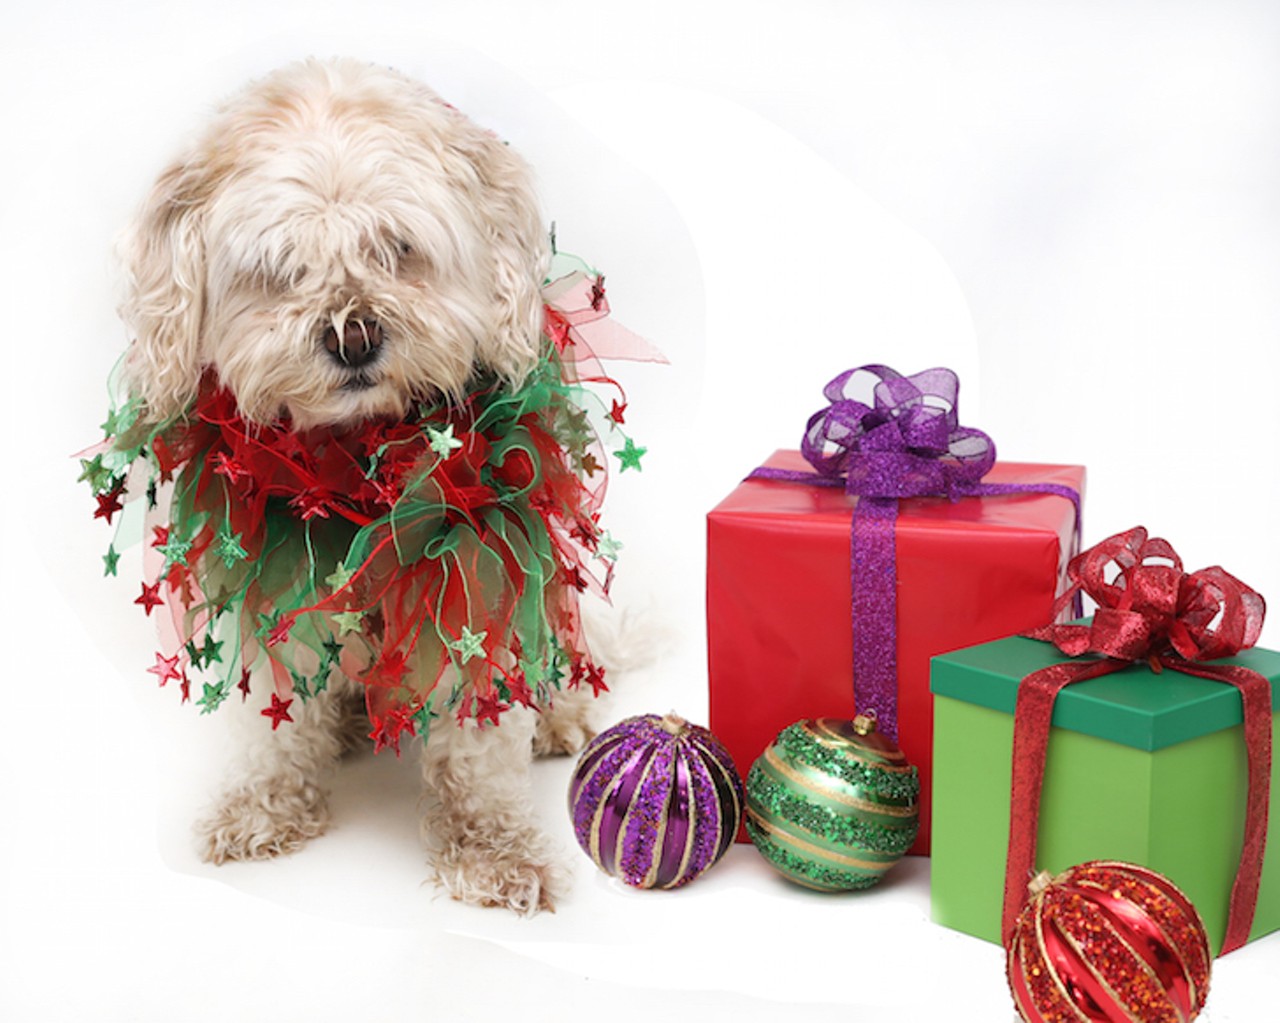 29 adorable dogs and cats looking for a new home this Christmas